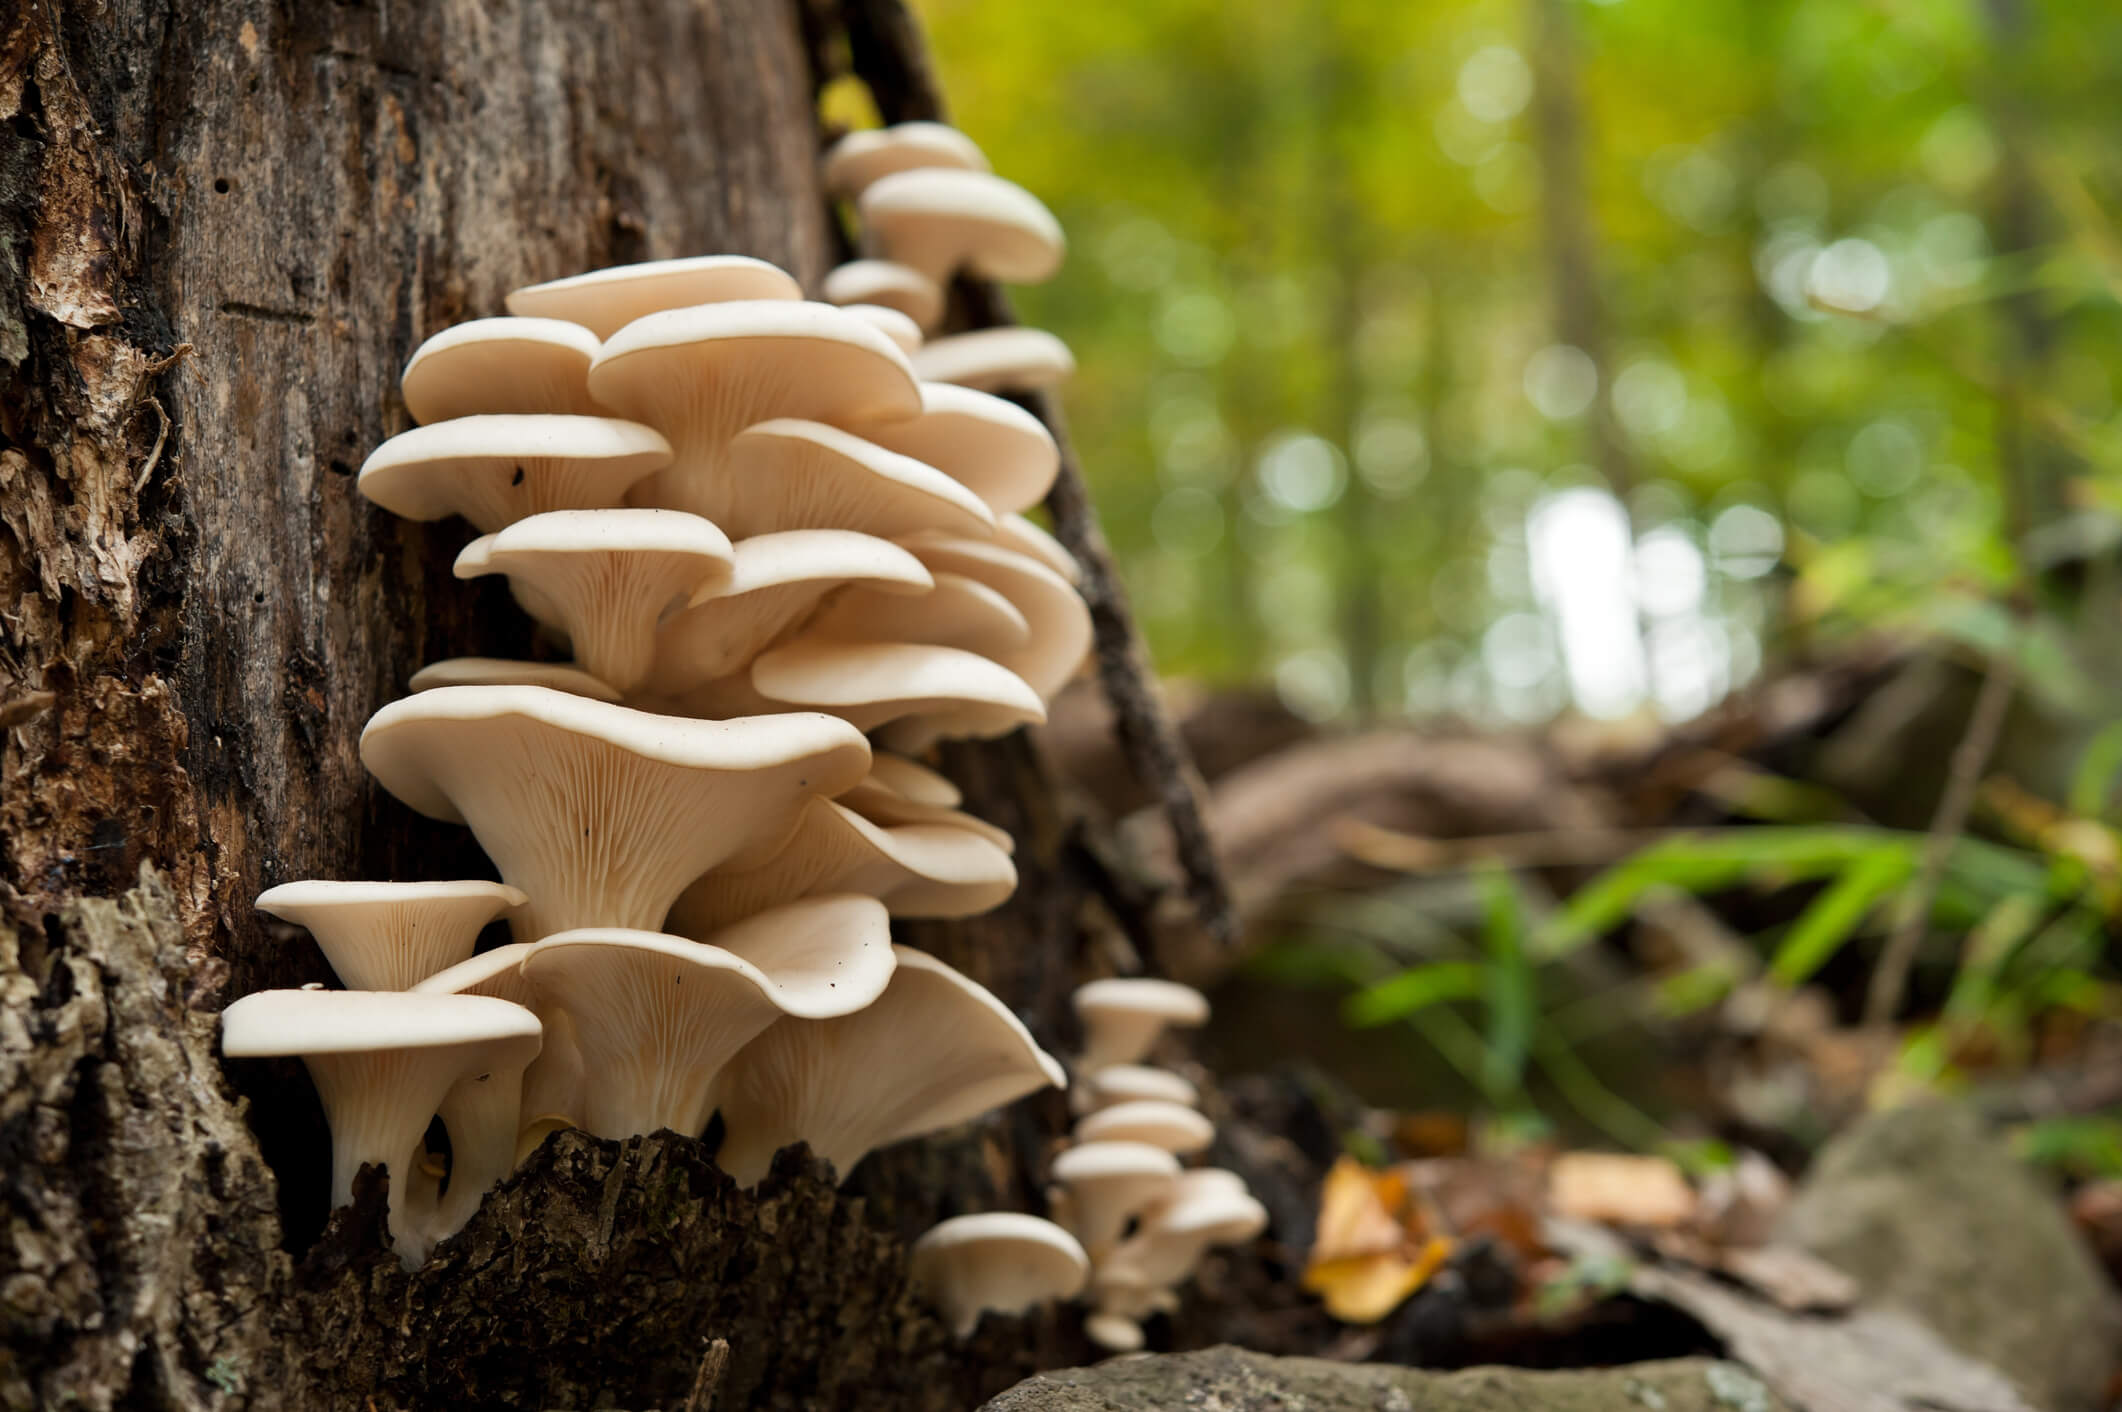 A healthy looking clutch of fresh oyster mushrooms growing out of the base of a dead tree. Shot with shallow depth of field in natural light.